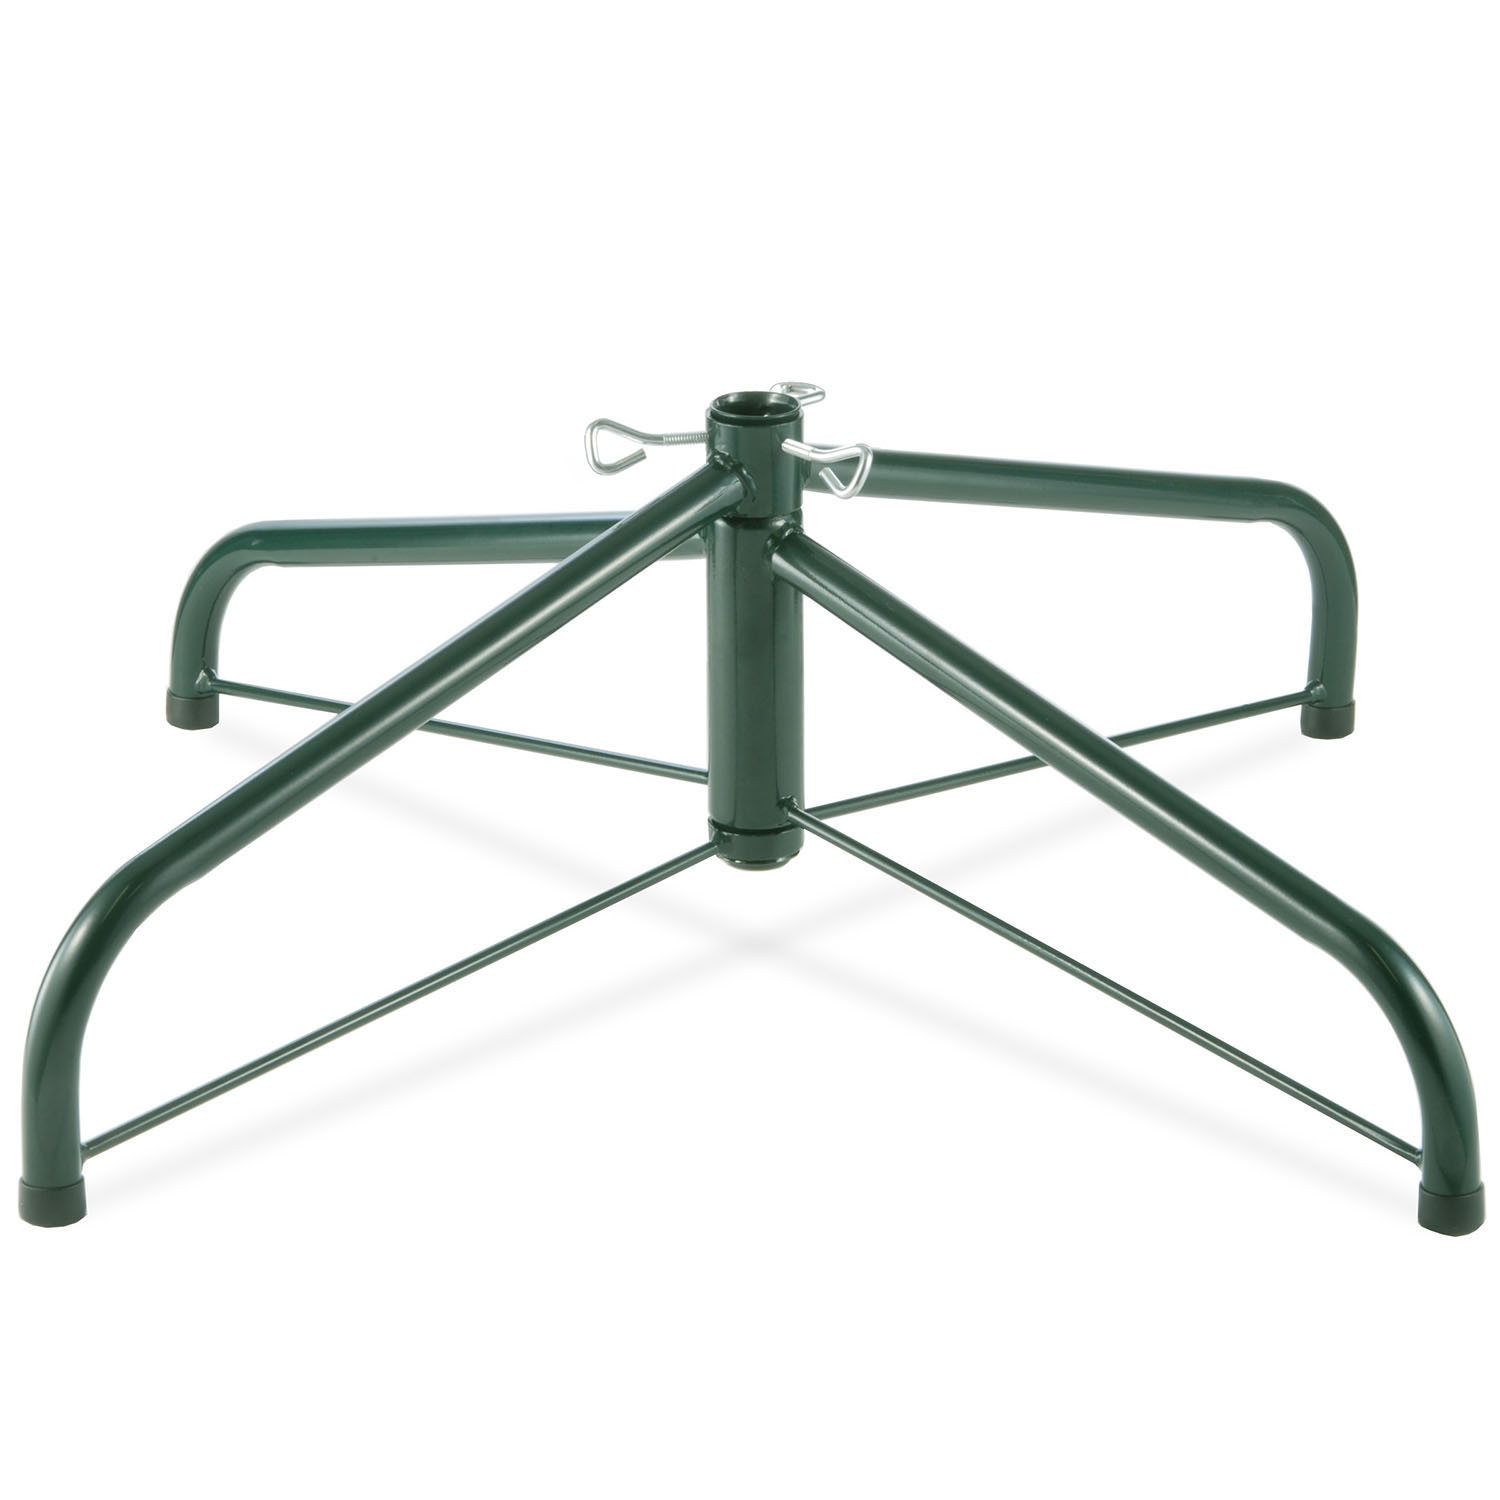 32 Inch Folding Tree Stand For 9 Foot -12 Foot Trees: 2 Inch Pole